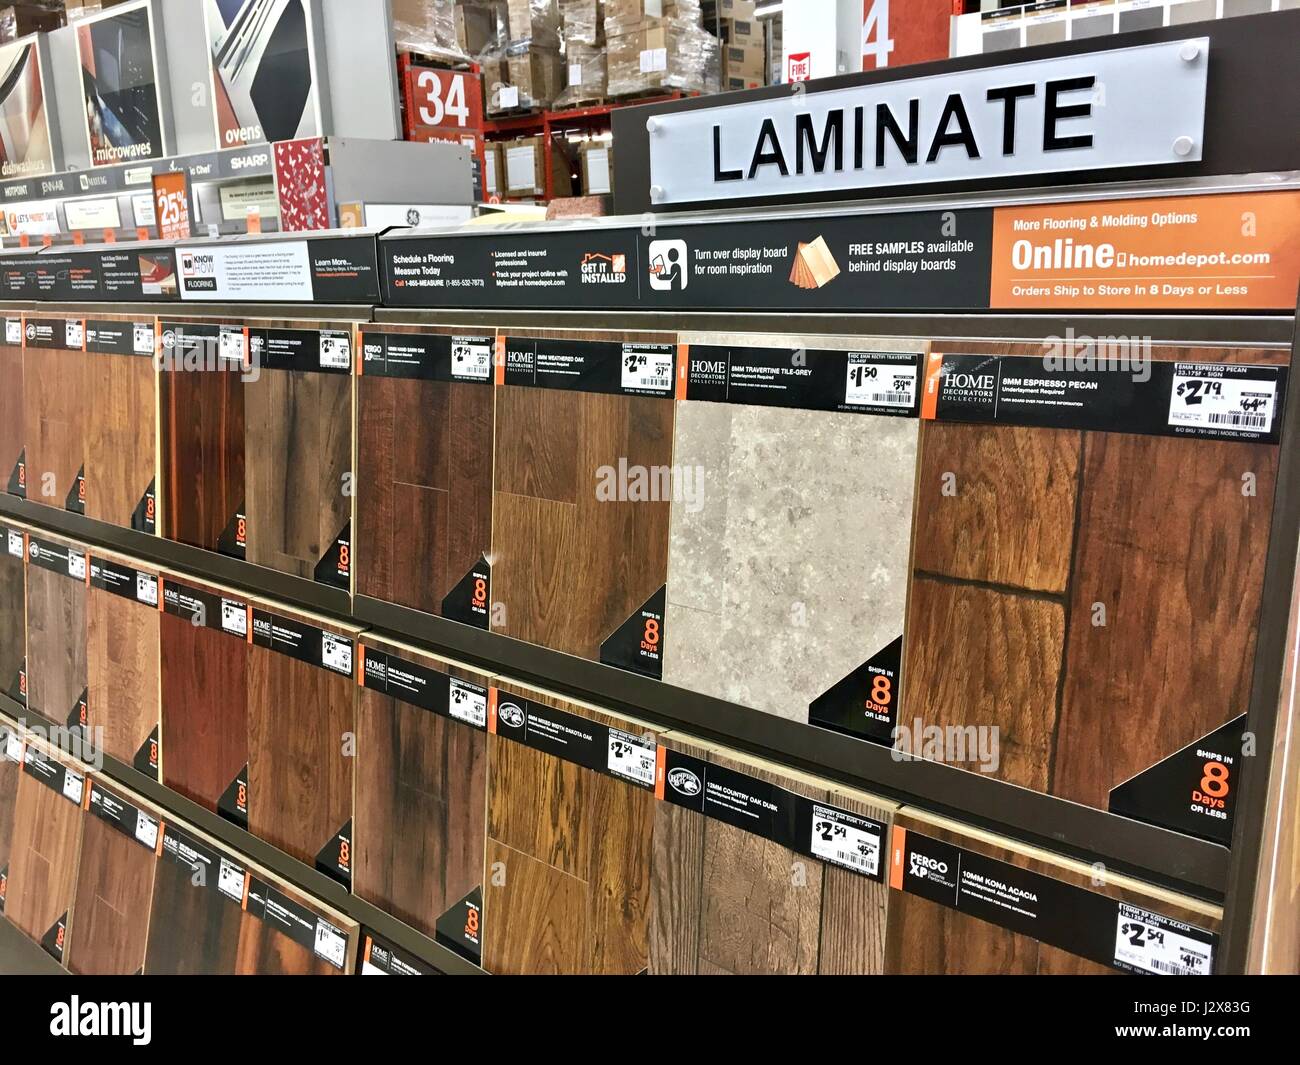 Laminat-Auswahl in The Home Depot Shop Stockfoto